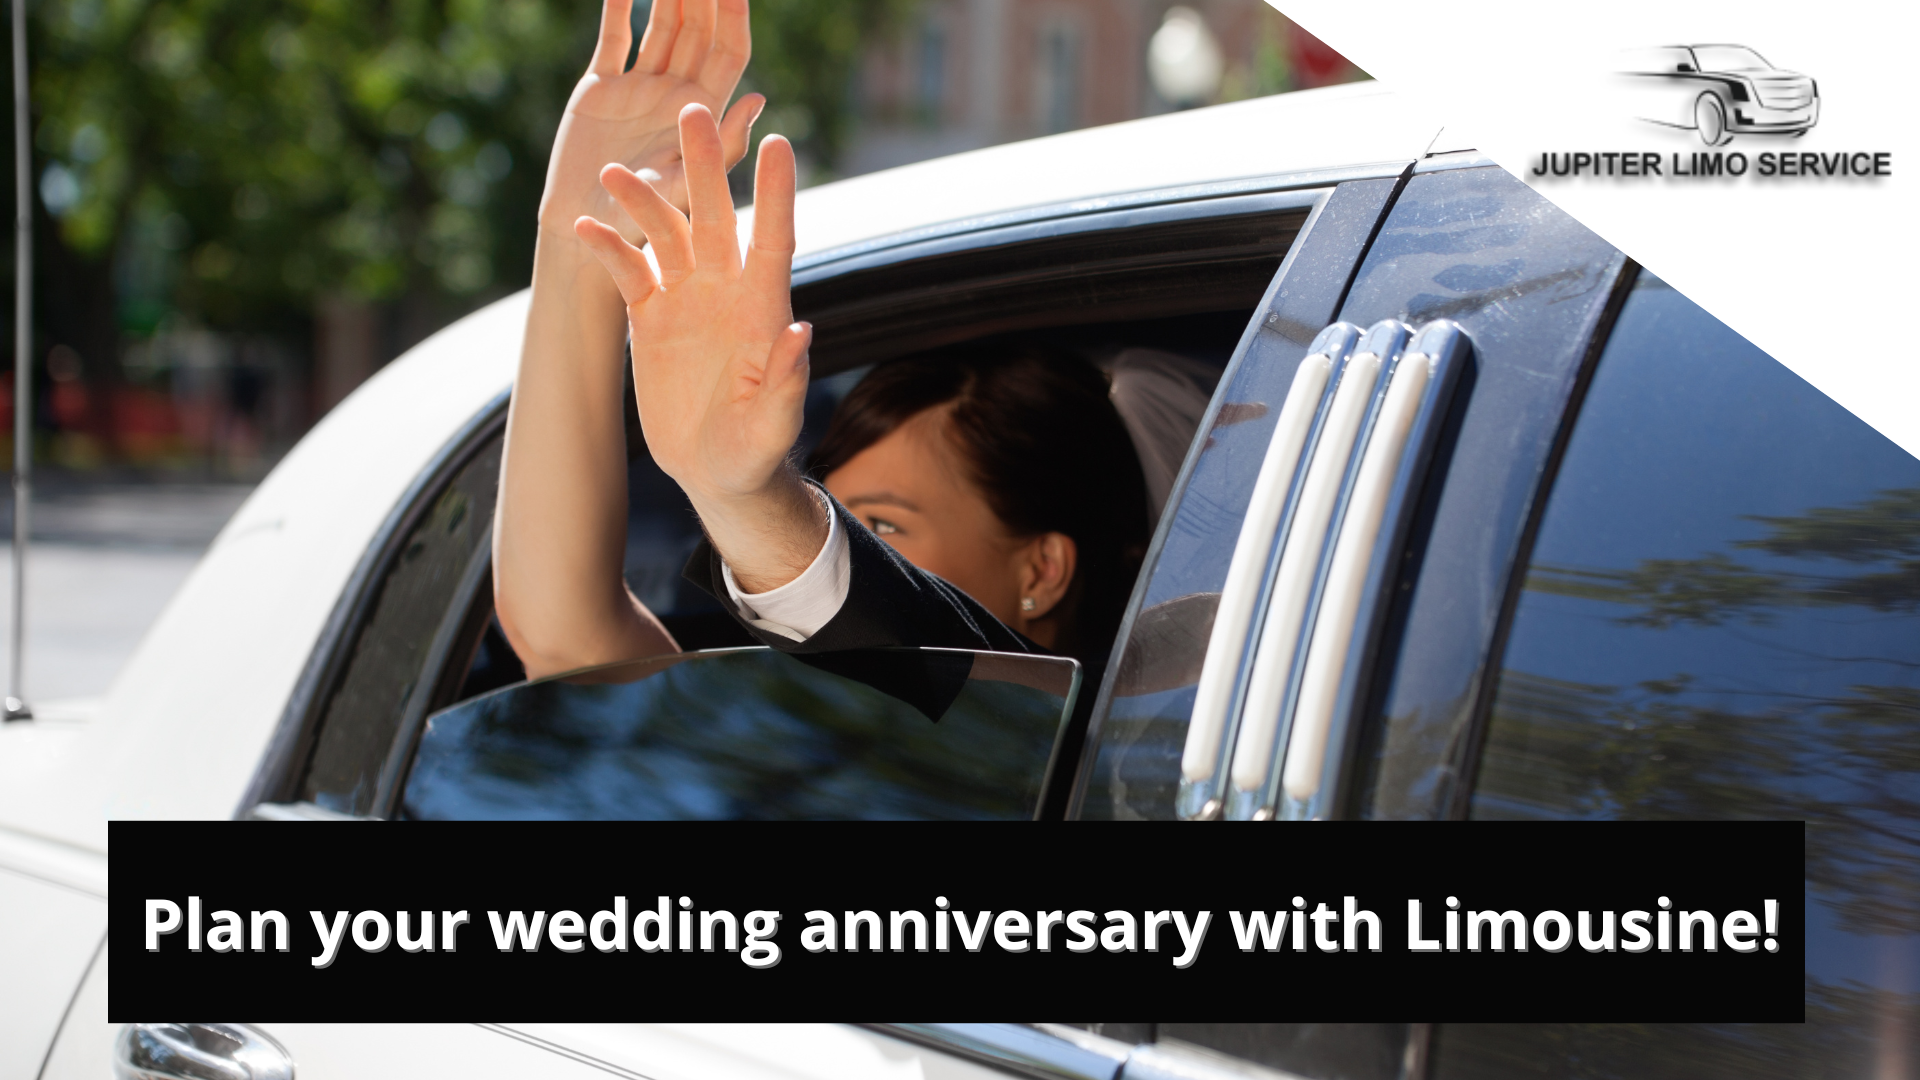 Plan your wedding anniversary with Limousine!